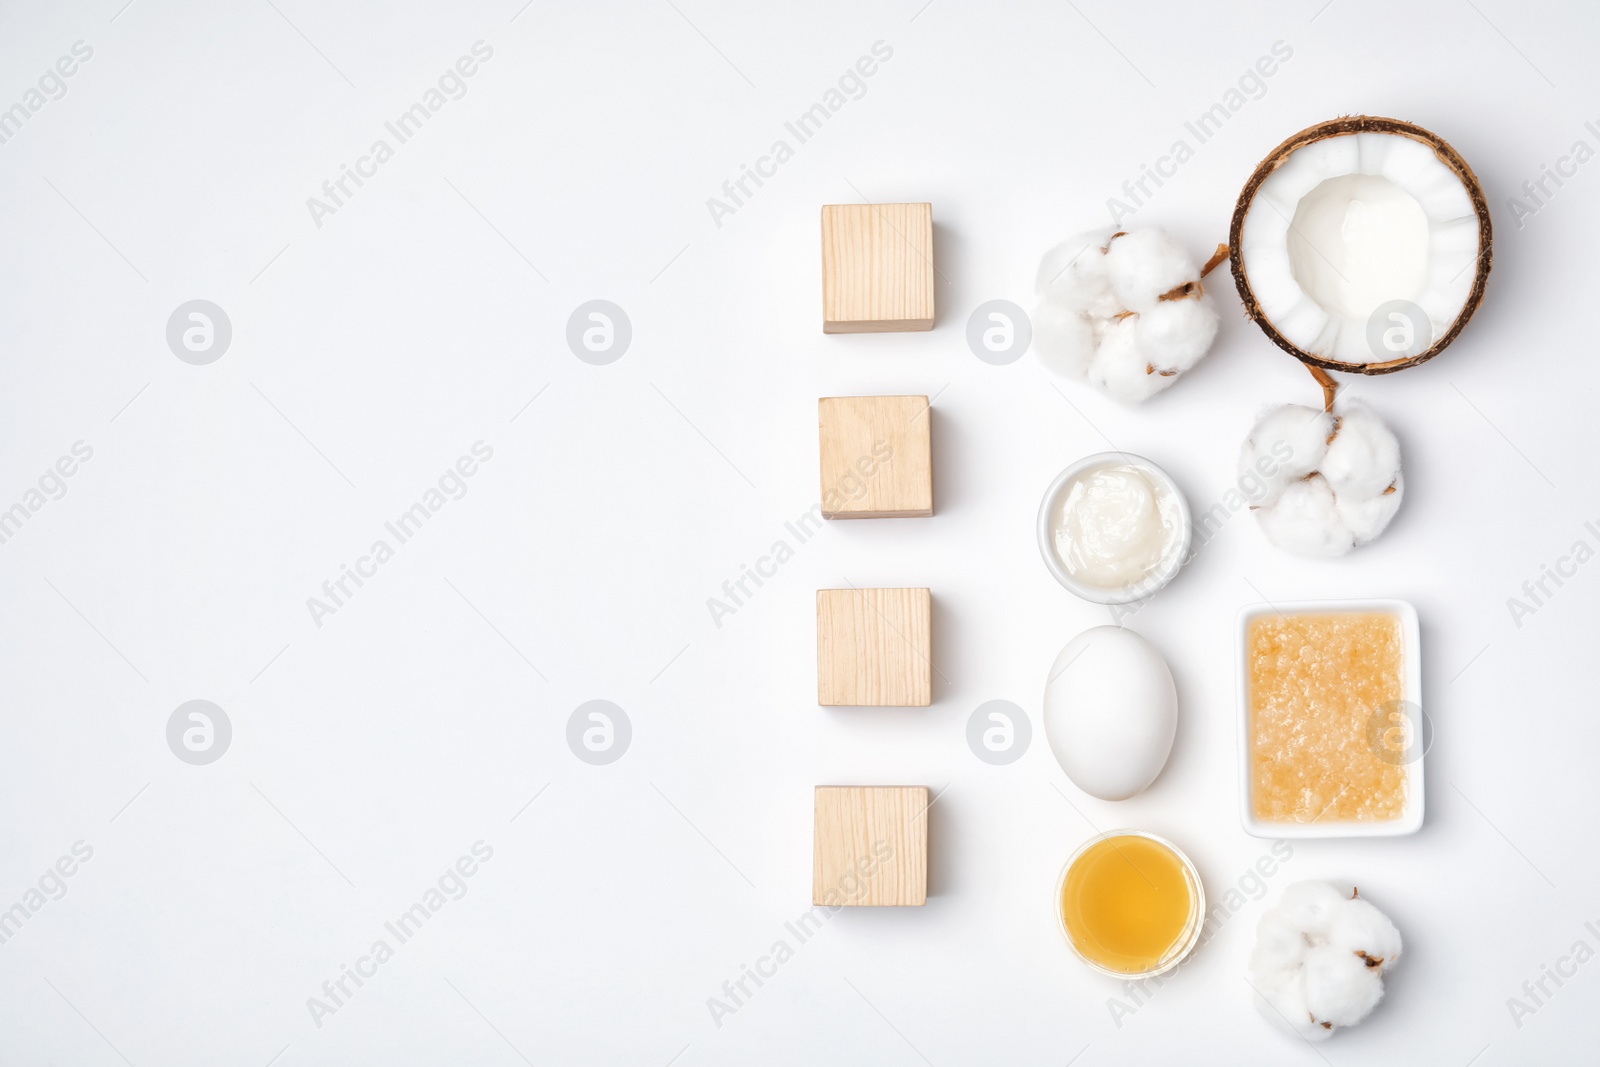 Photo of Cubes with word "Acne" and homemade problem skin remedy ingredients on white background